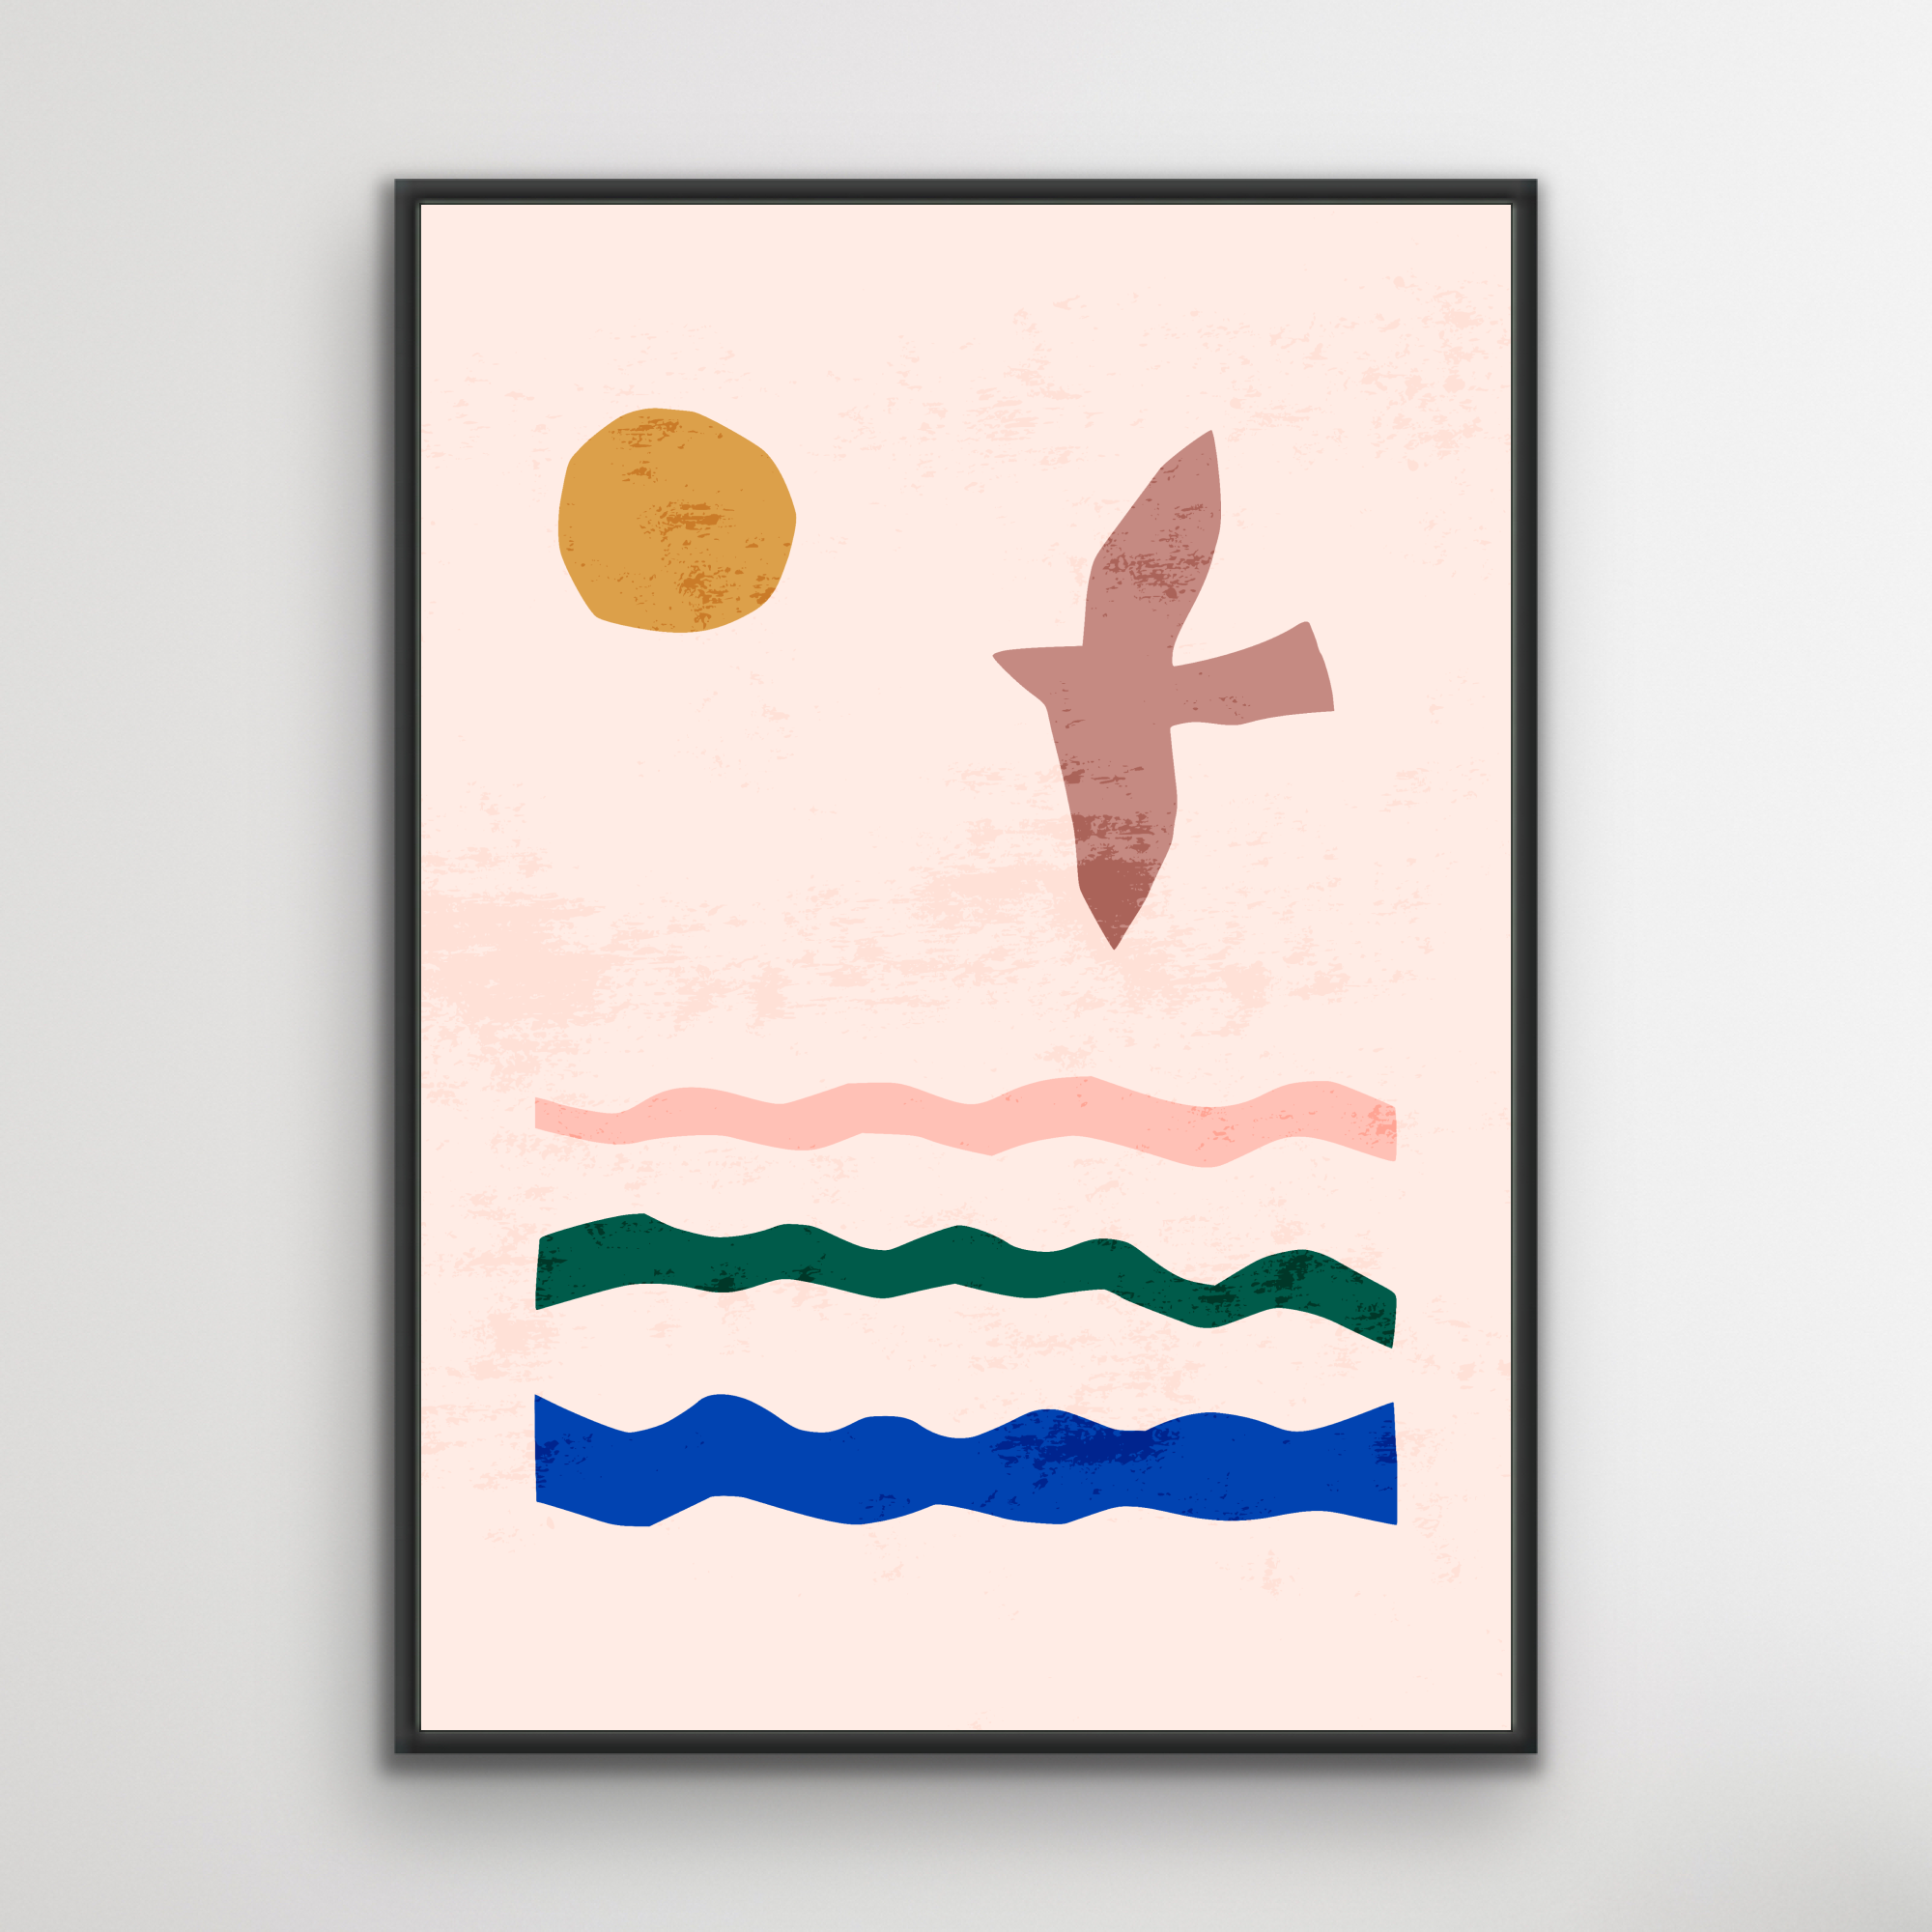 Poster: "Flying Over Sea"